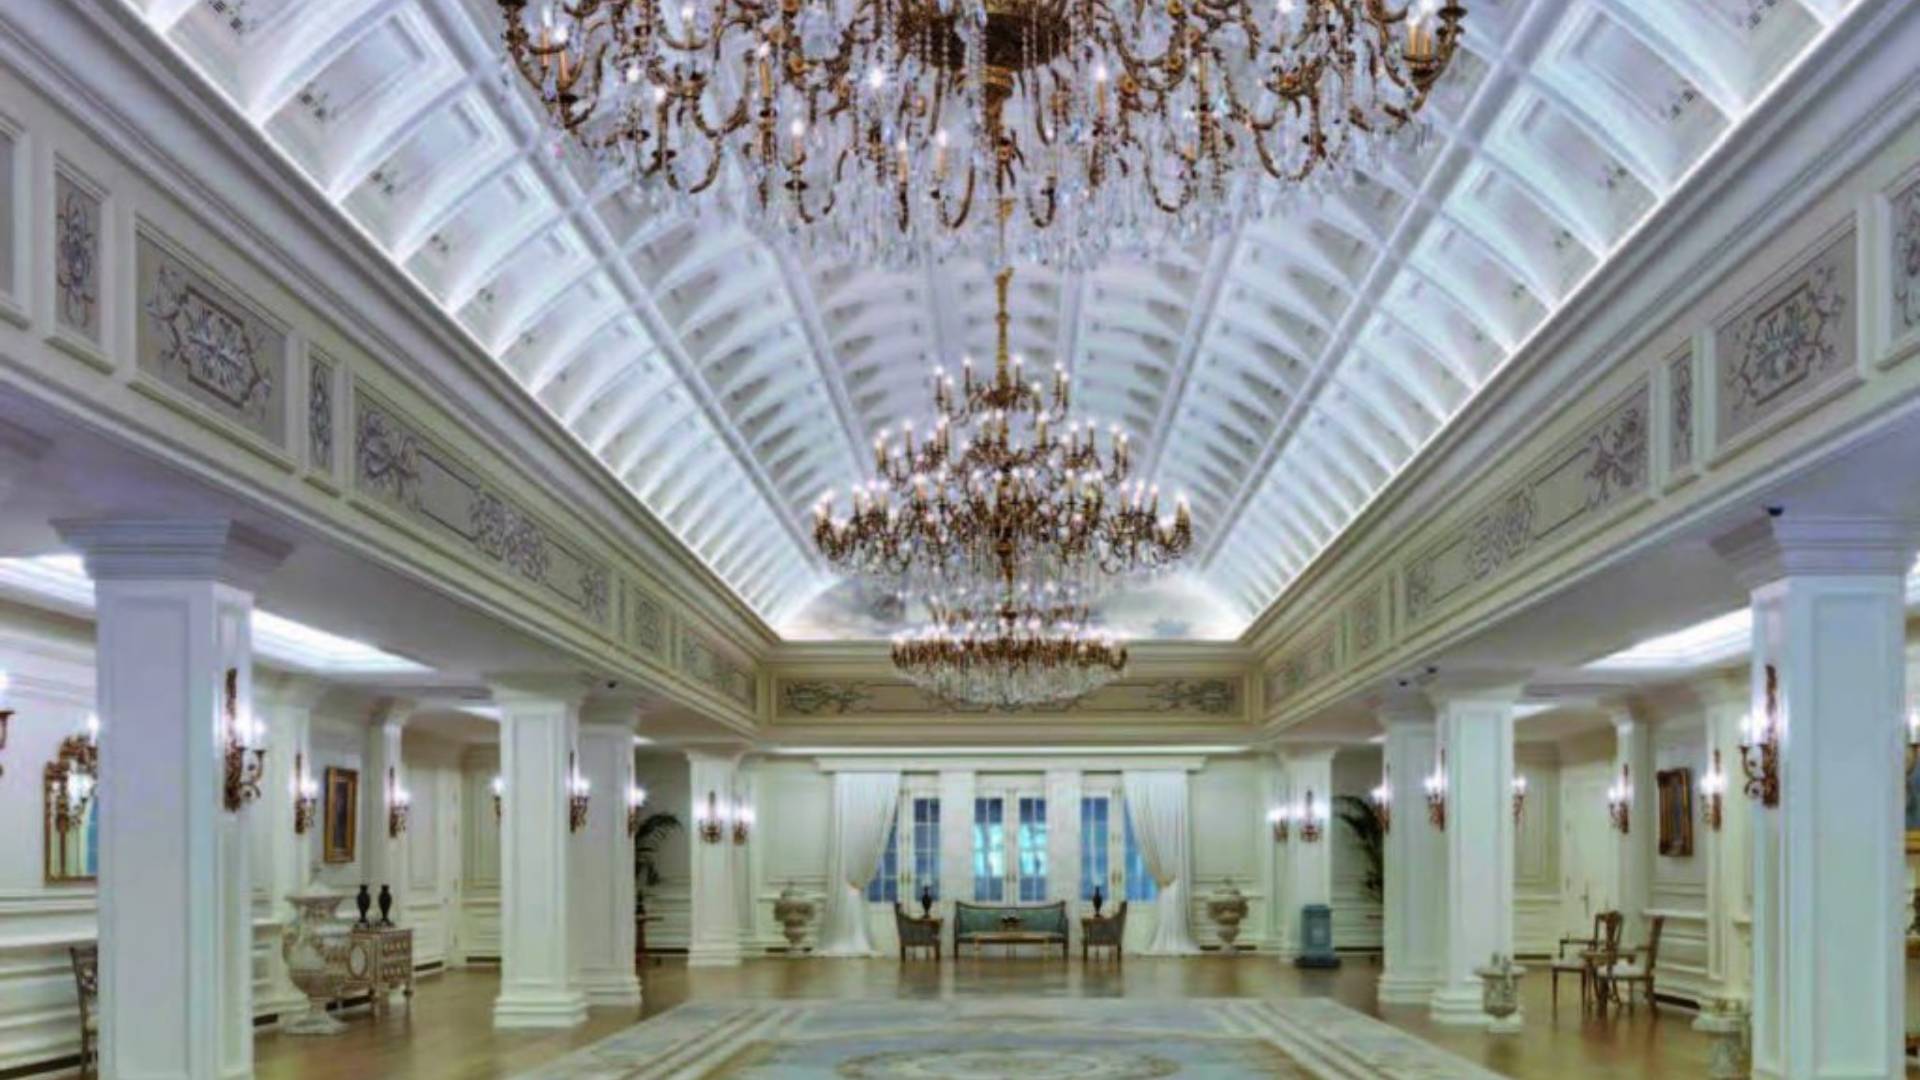 Reception Hall of Presidential Palace